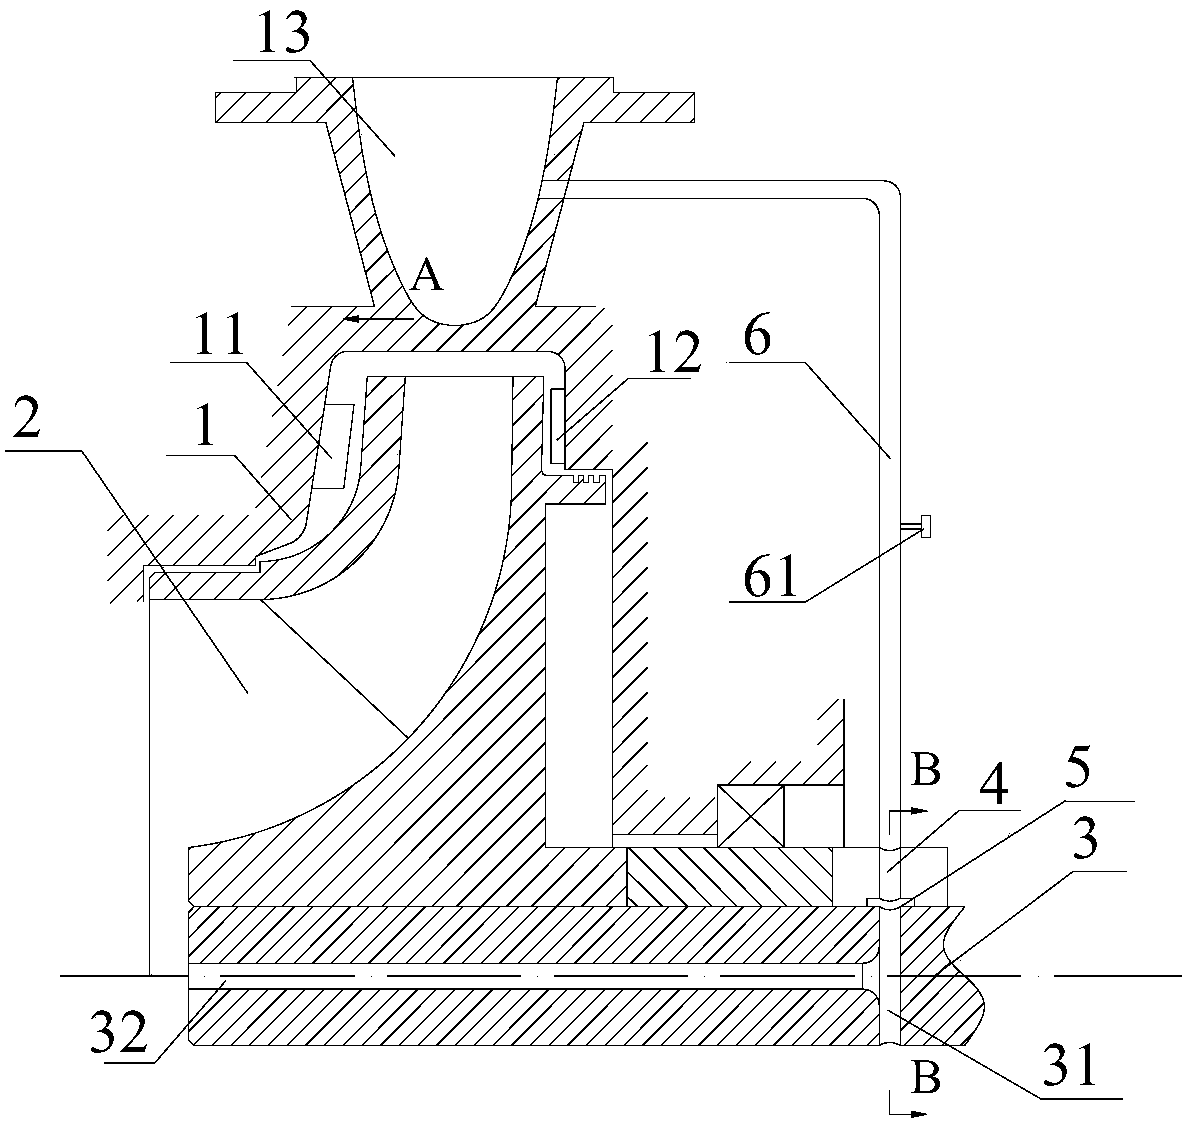 A single-stage centrifugal pump capable of self-balancing axial force